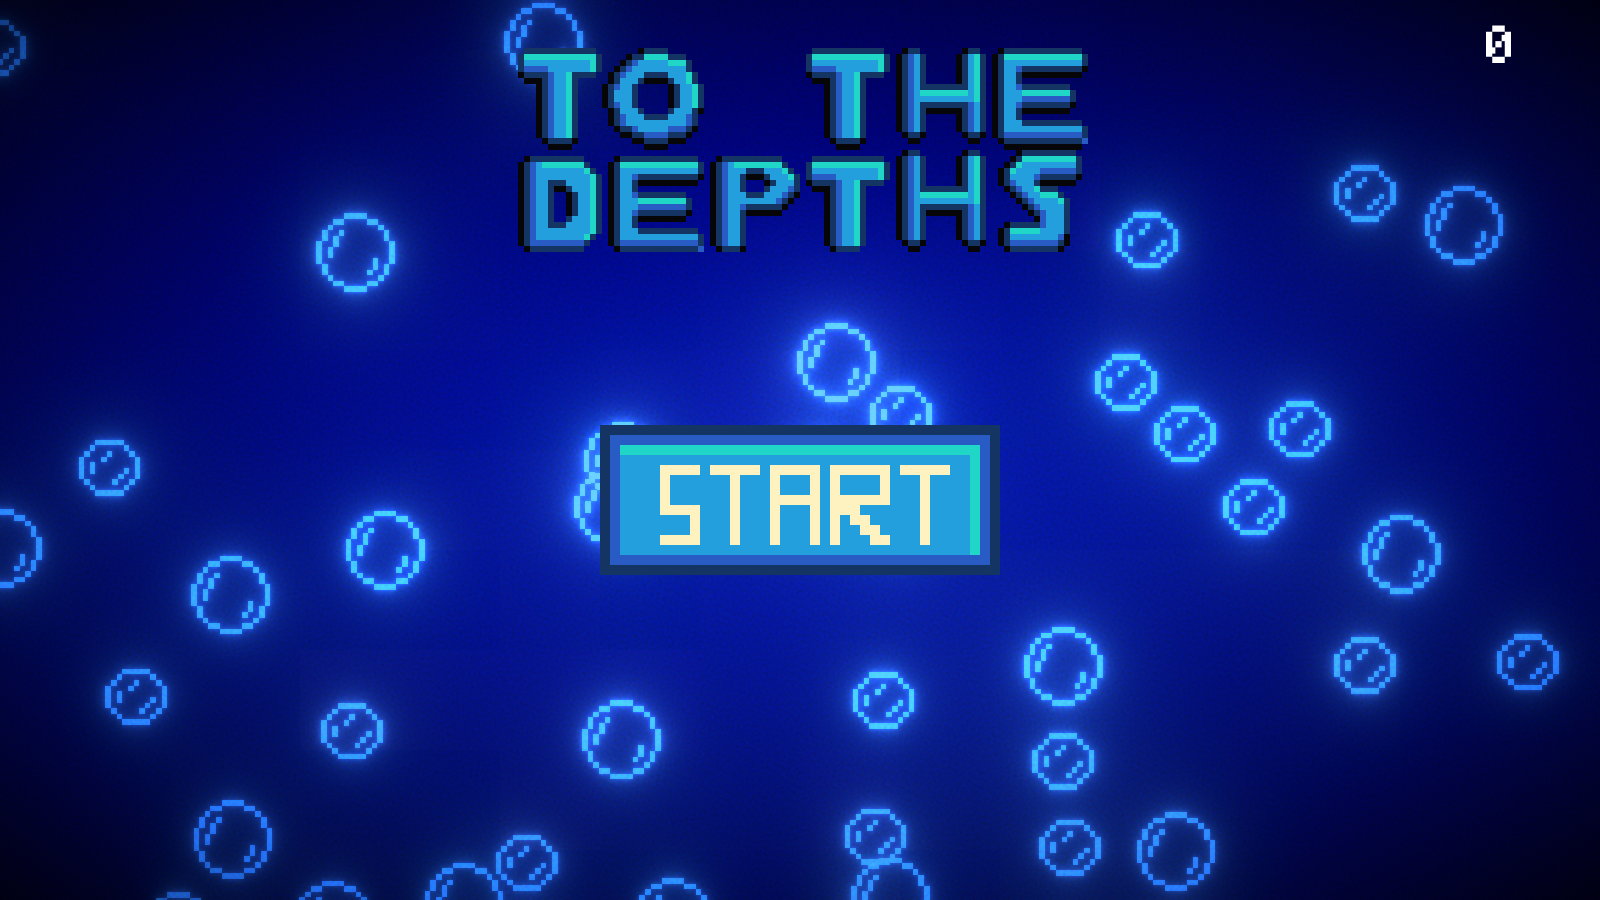 To The Depths